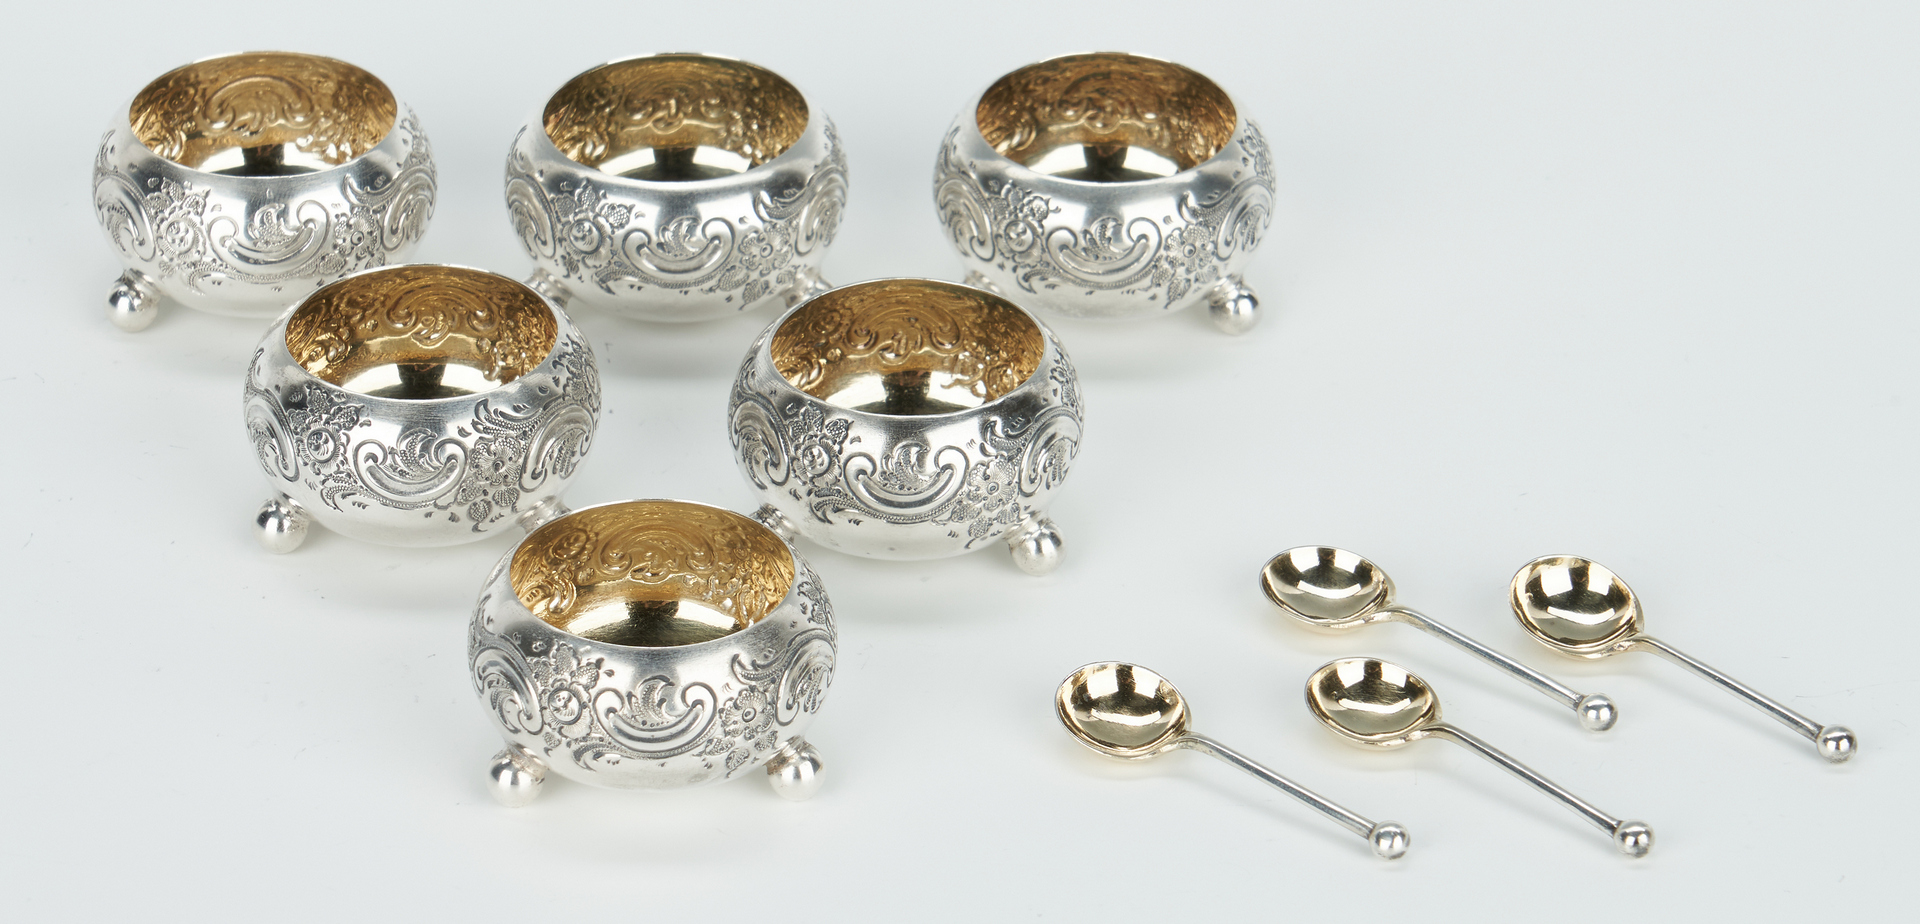 Lot 246: 13 Sterling Silver Items, incl. Candlesticks & Salts